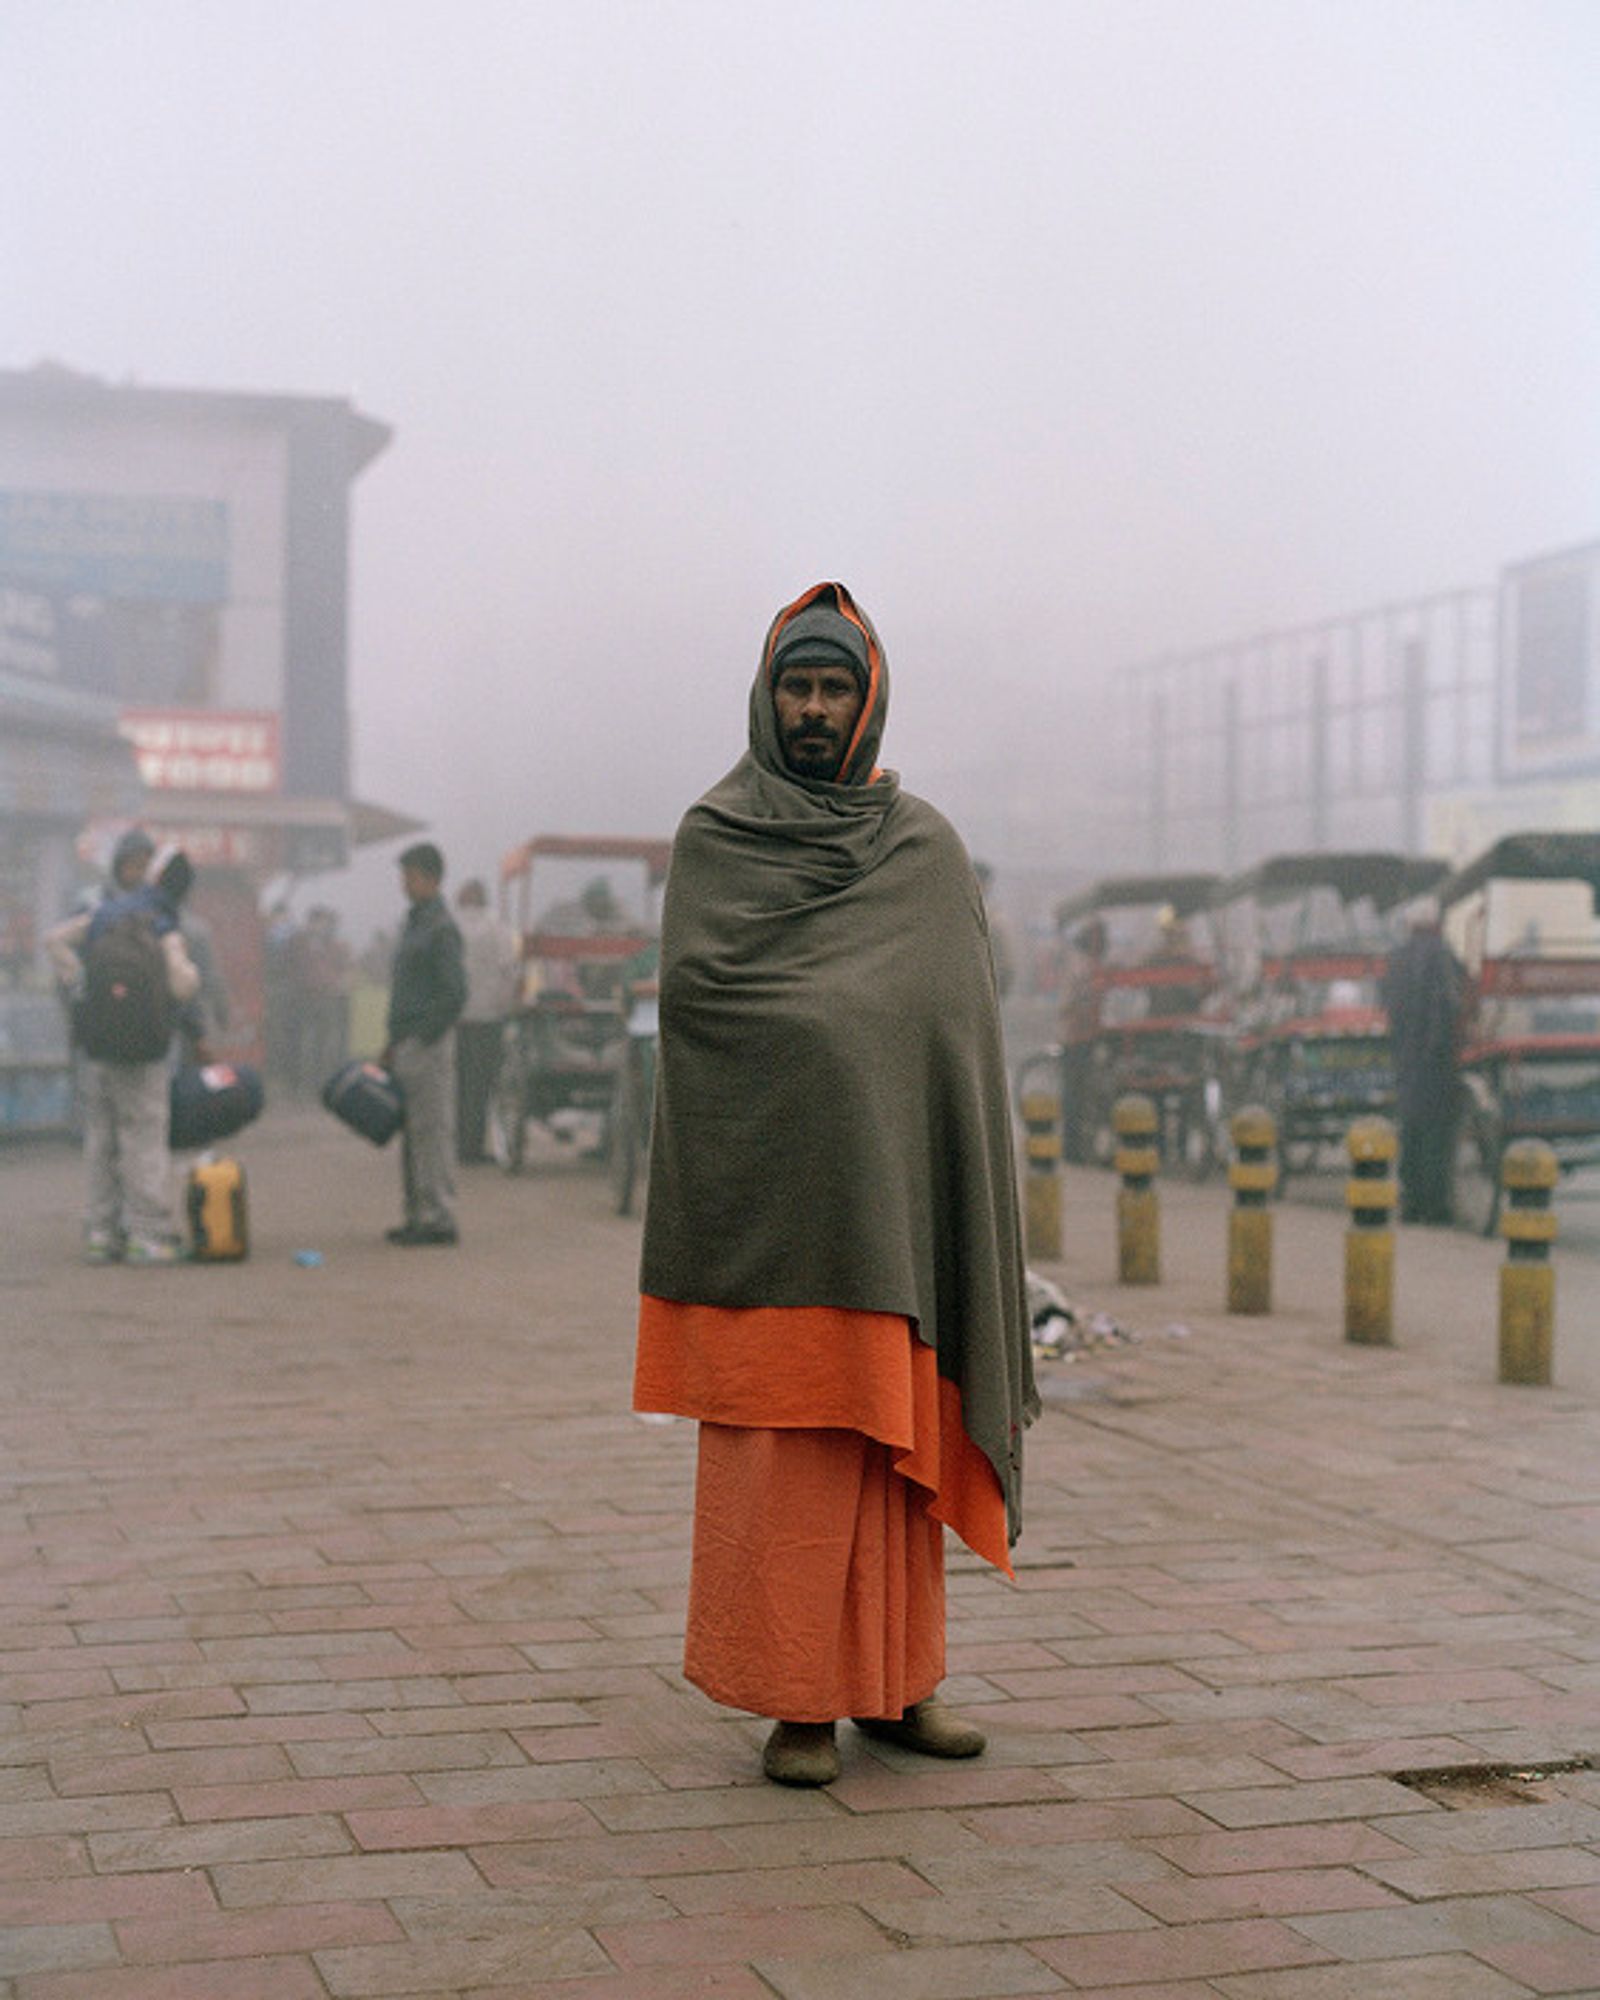 © Sebastian Forkarth - Image from the Not east, not west .. India is the best photography project